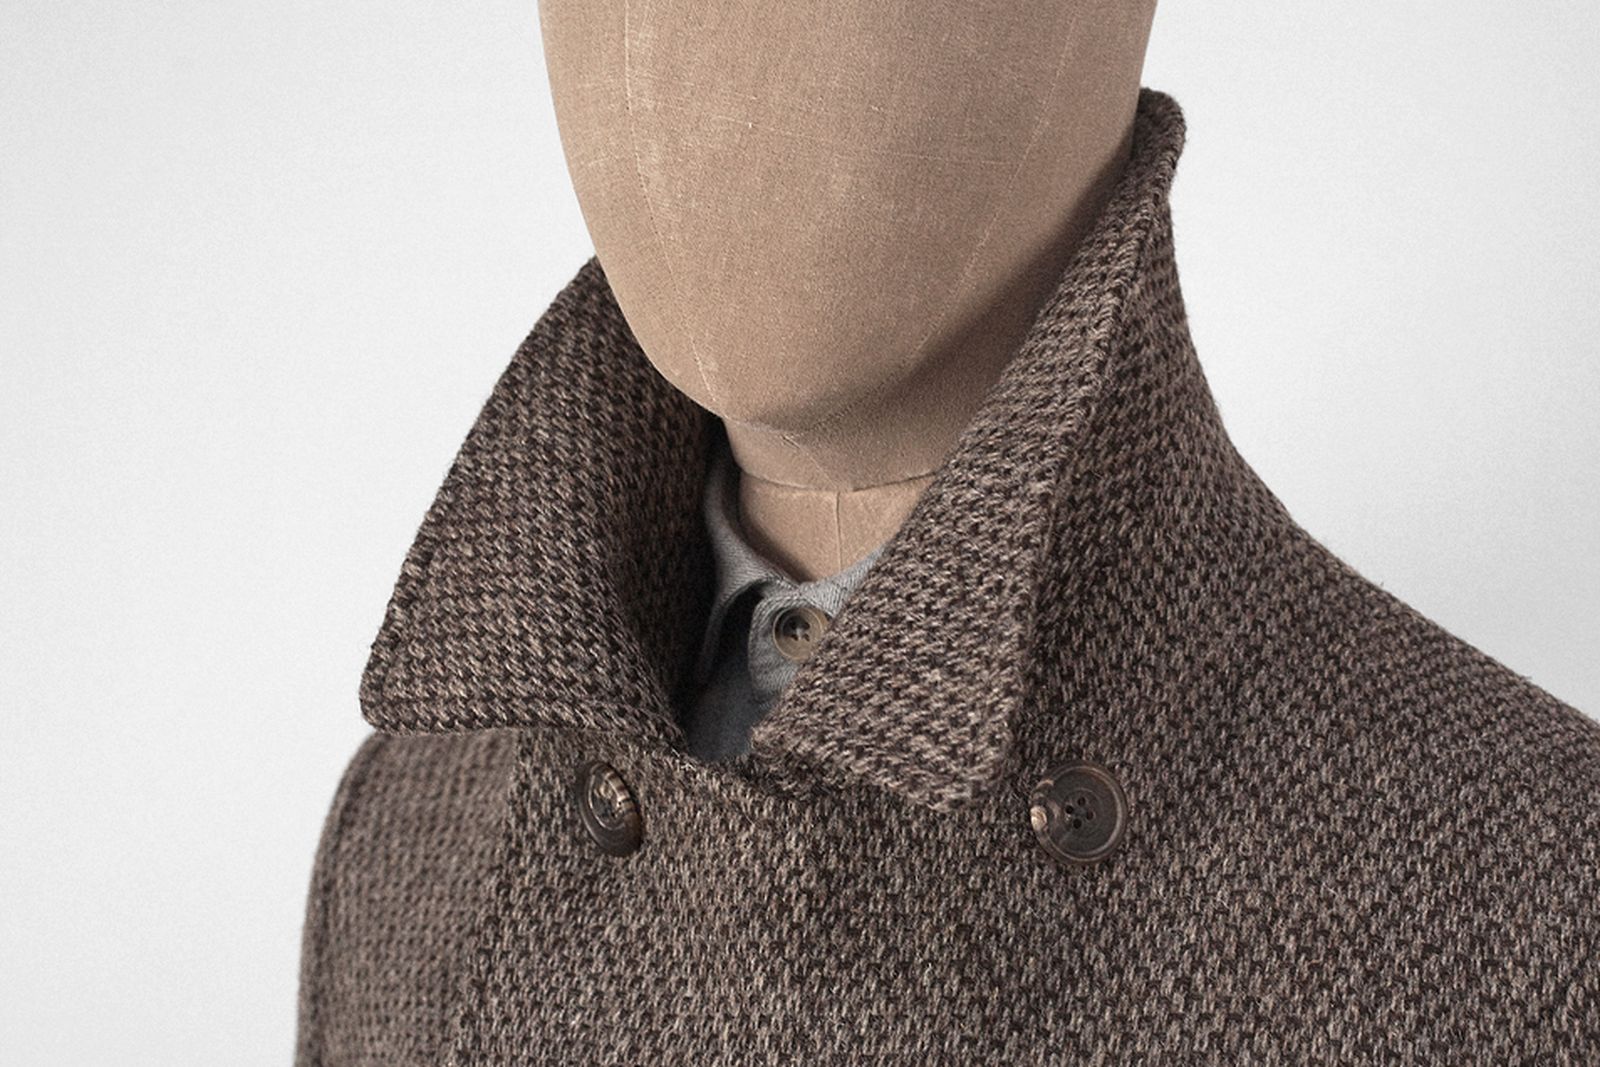 S.E.H Kelly Tobacco Brown Tweed Peacoat • Selectism